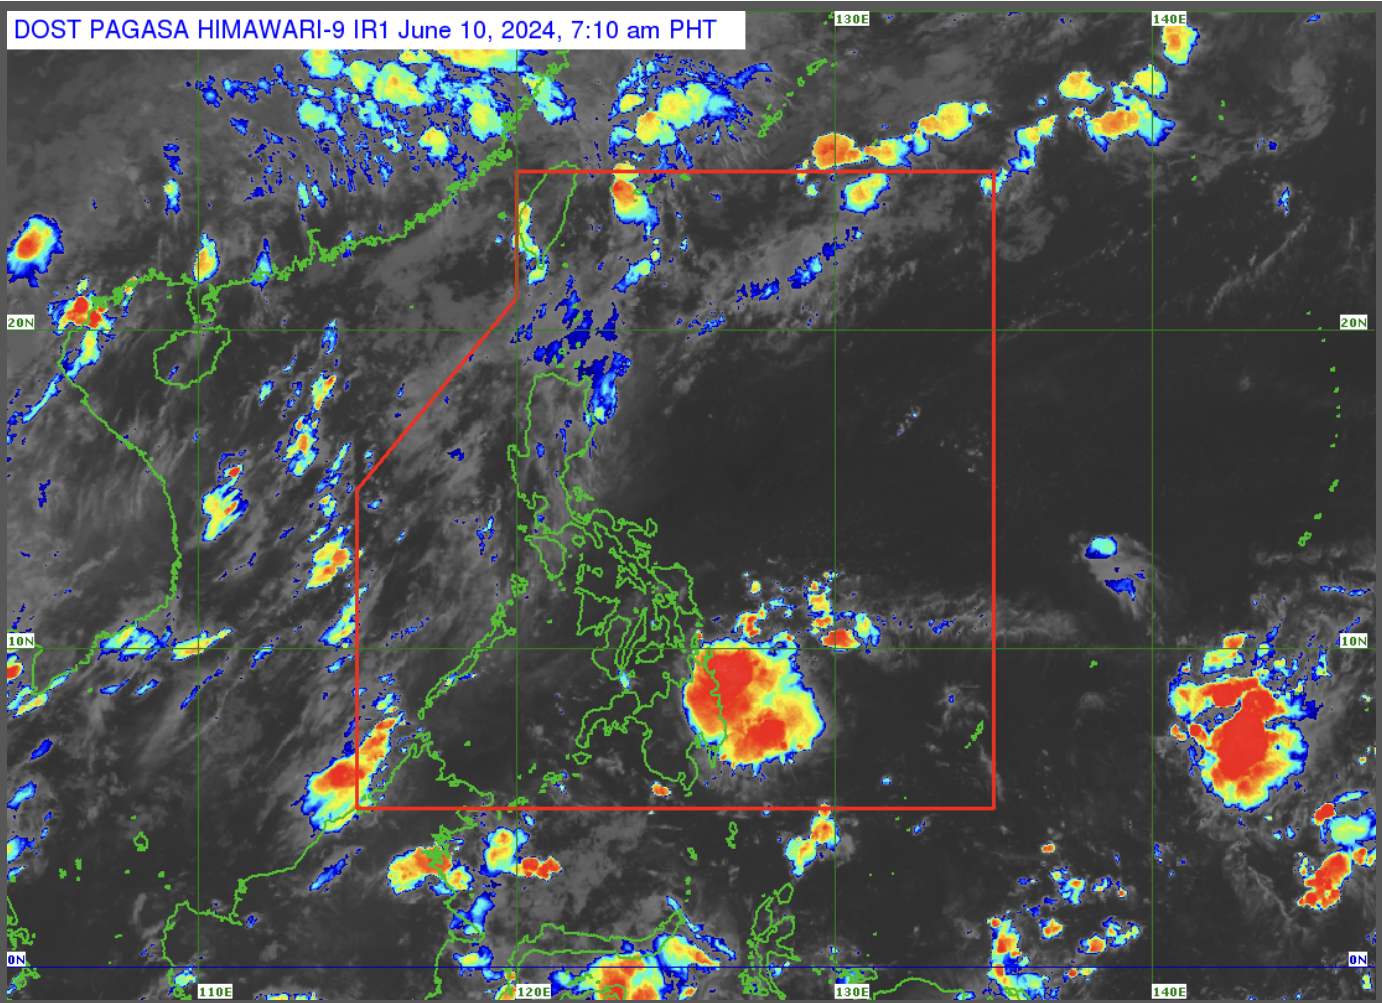 cloudy Monday with possible rain showers - Pagasa